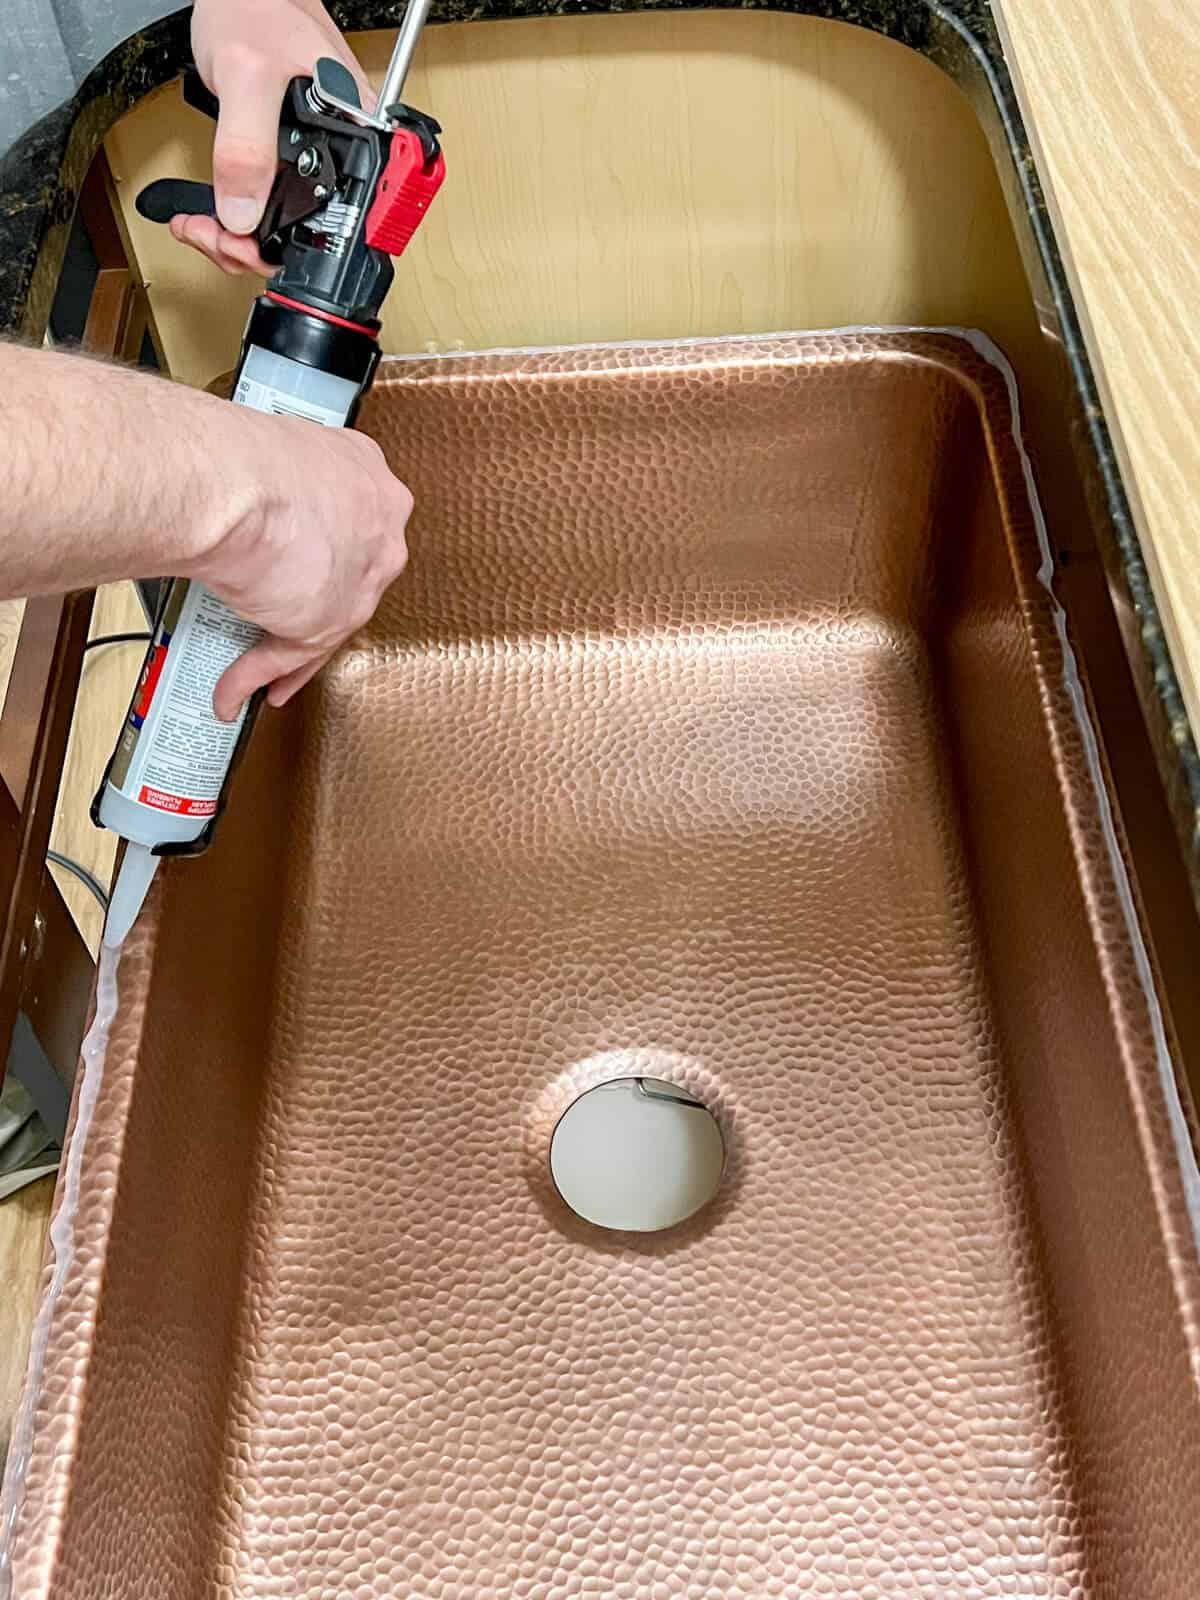 applying silicone adhesive to a hammered copper sink before installation.